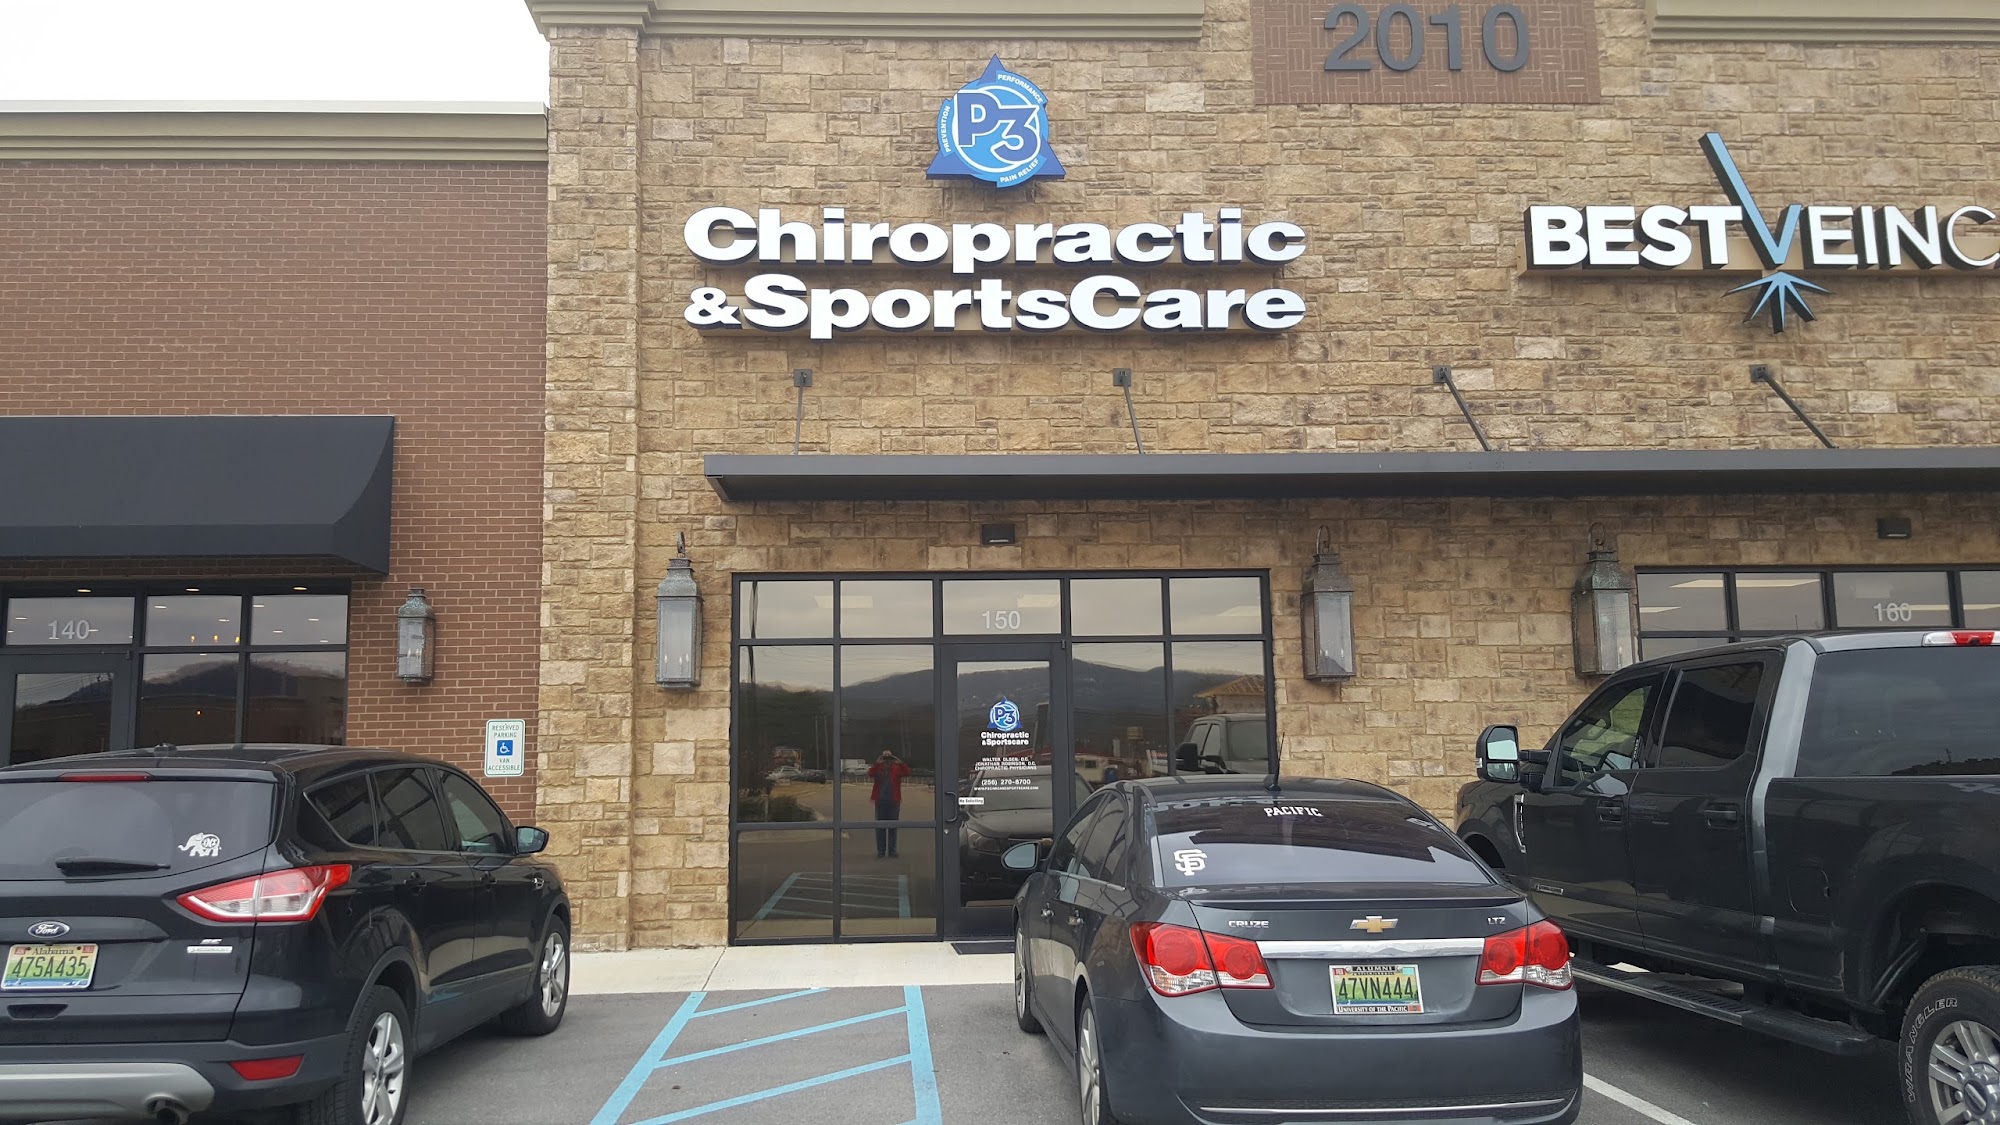 P3 Chiropractic and Sports Care